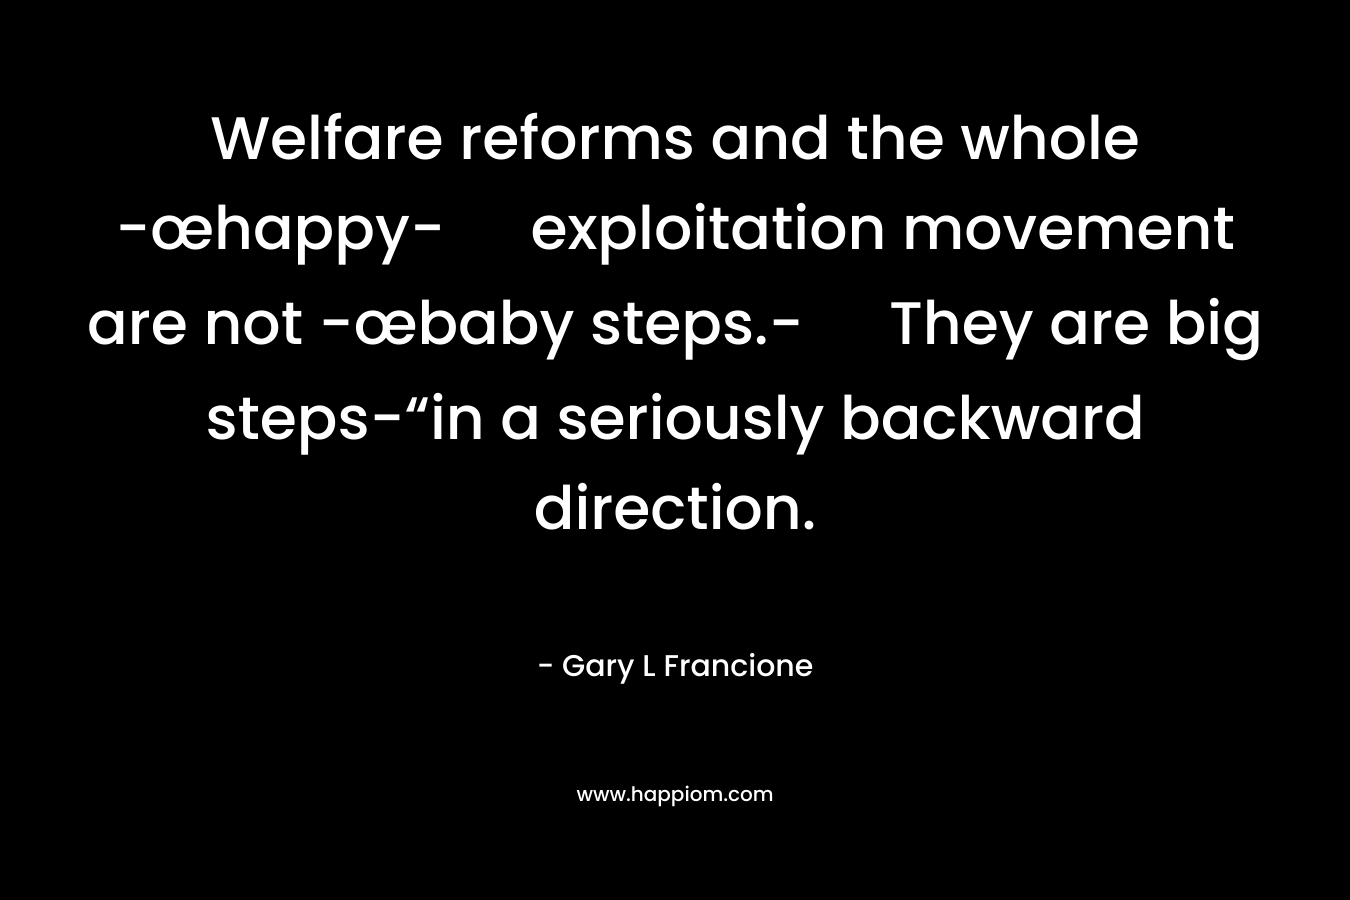 Welfare reforms and the whole -œhappy- exploitation movement are not -œbaby steps.- They are big steps-“in a seriously backward direction. – Gary L Francione